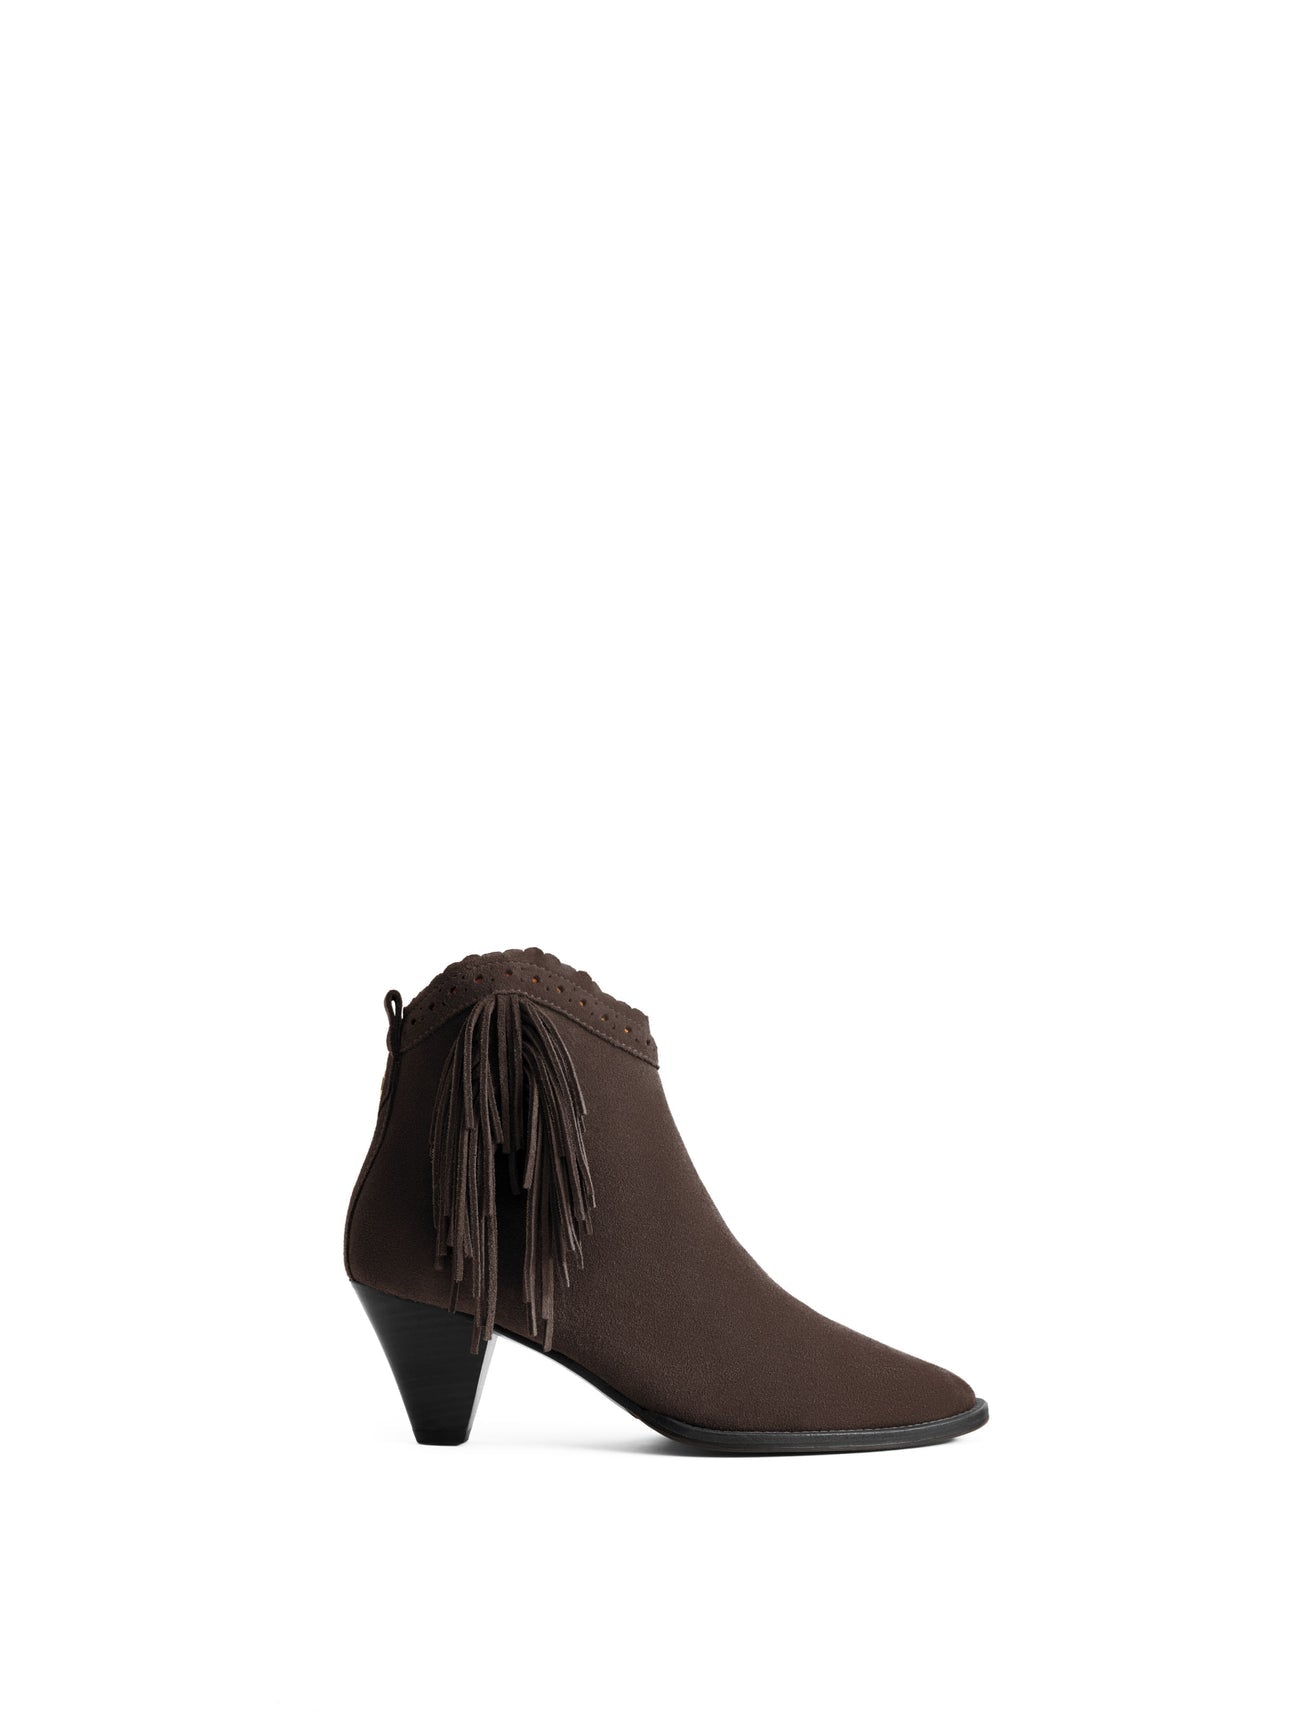 The Regina
Women's Fringed Ankle Boot - Chocolate Suede